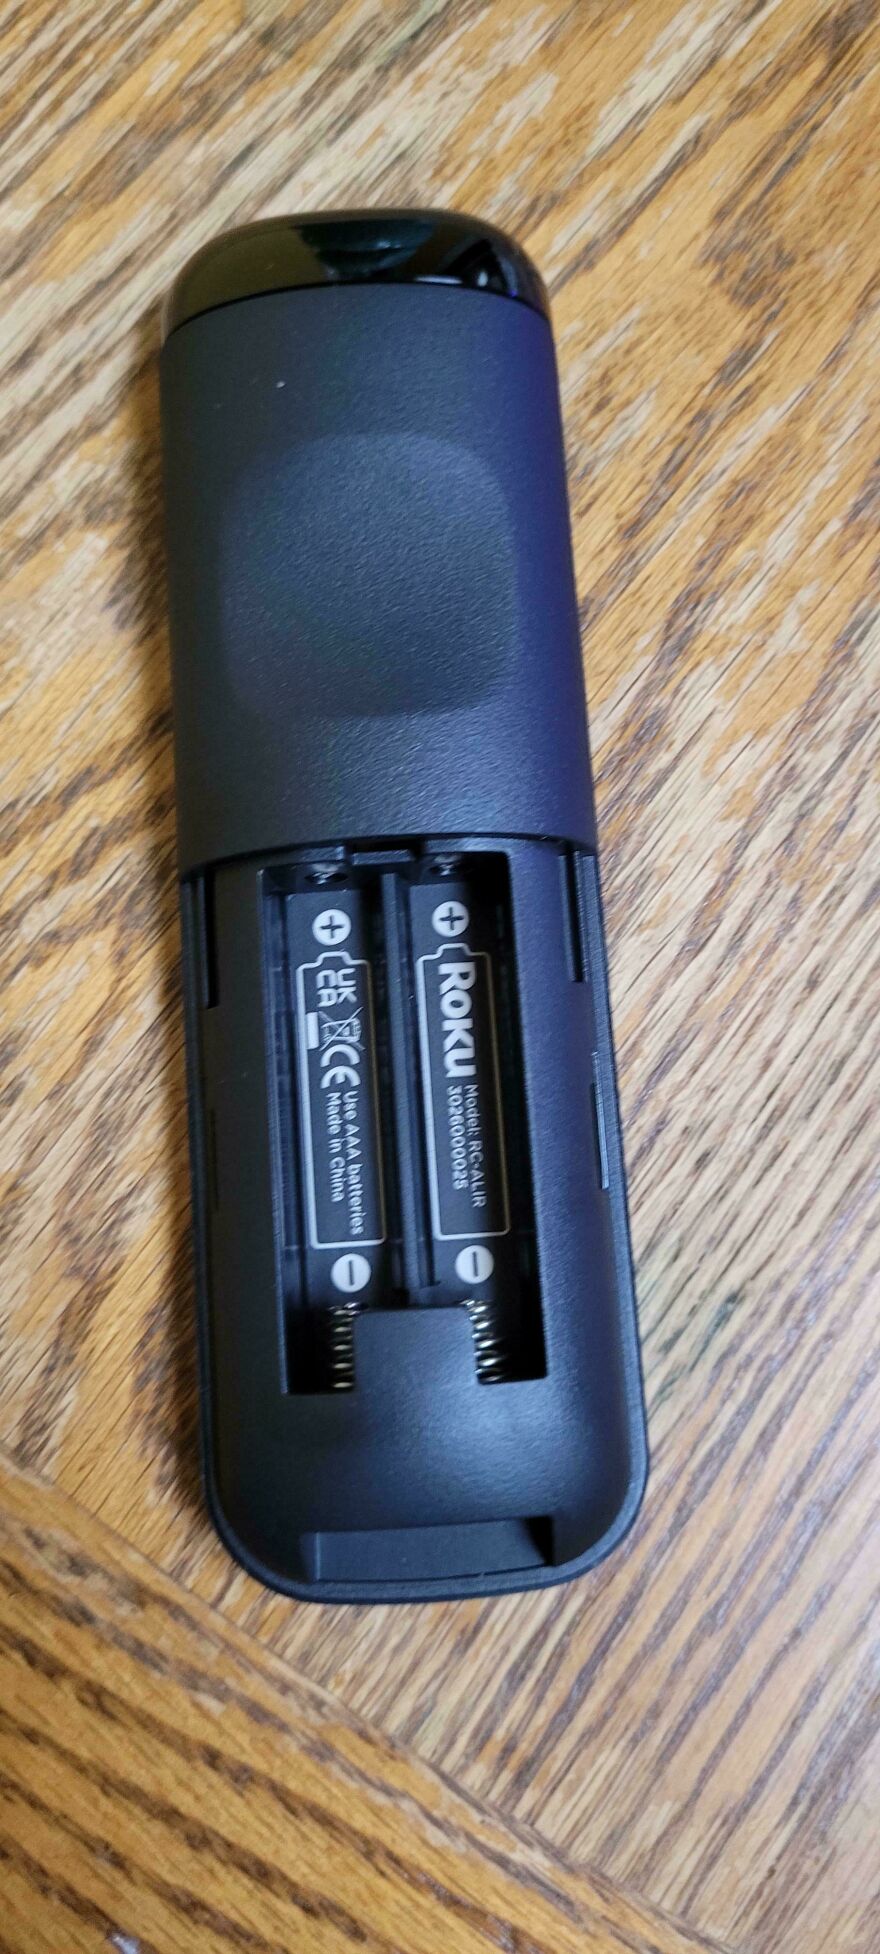 The Batteries In My Remote Go The Same Direction